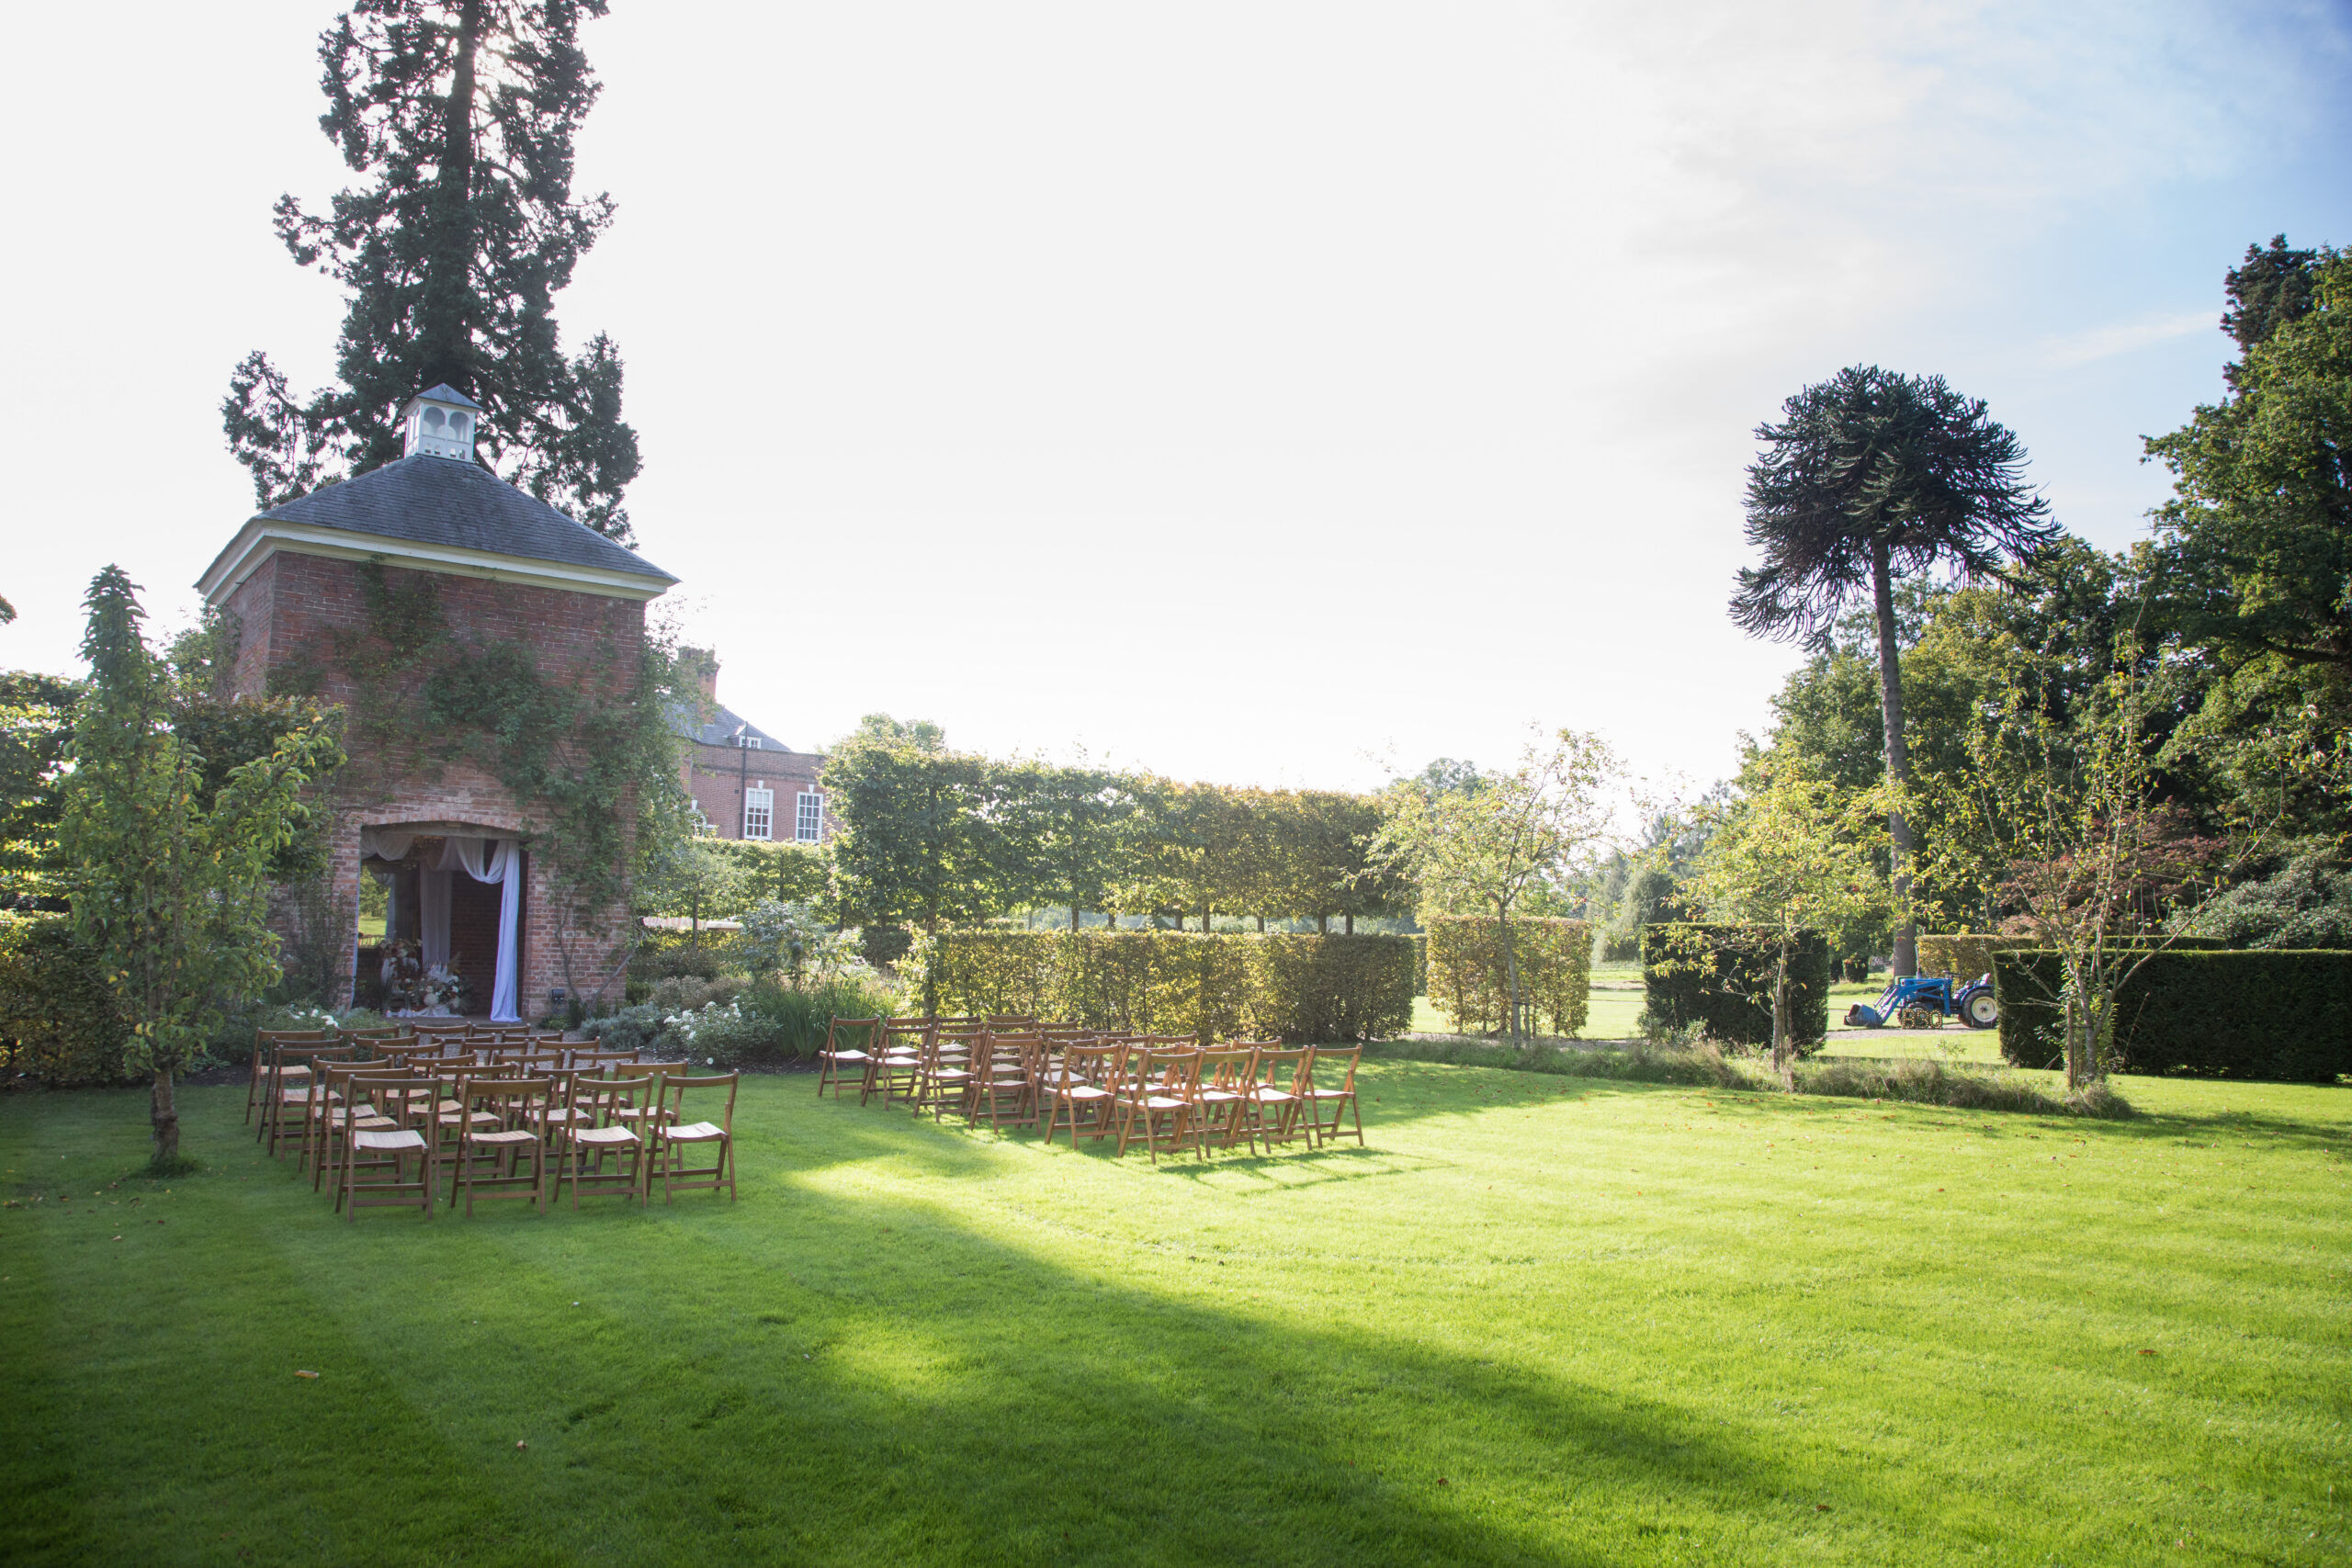 A stunning recap of luxury Whitchurch Wrexham wedding venue Iscoyd Park at their October Open Day photographed by Helen Baly